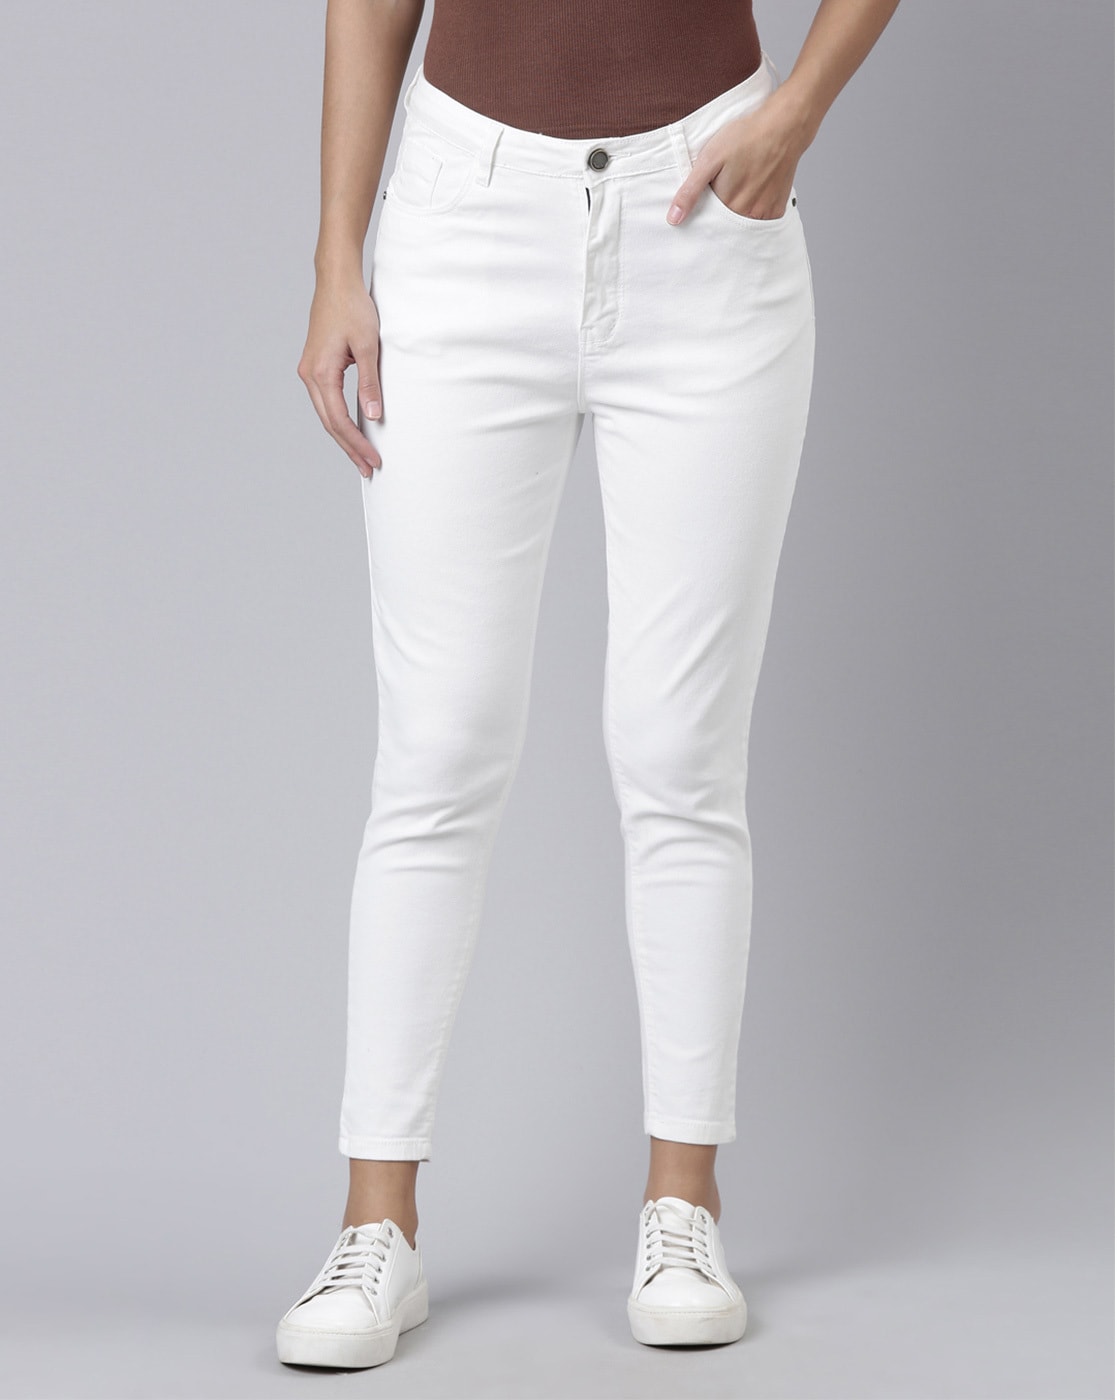 44 Best White Jeans for Women—Shop Our Favorite Cuts & Washes | Vogue